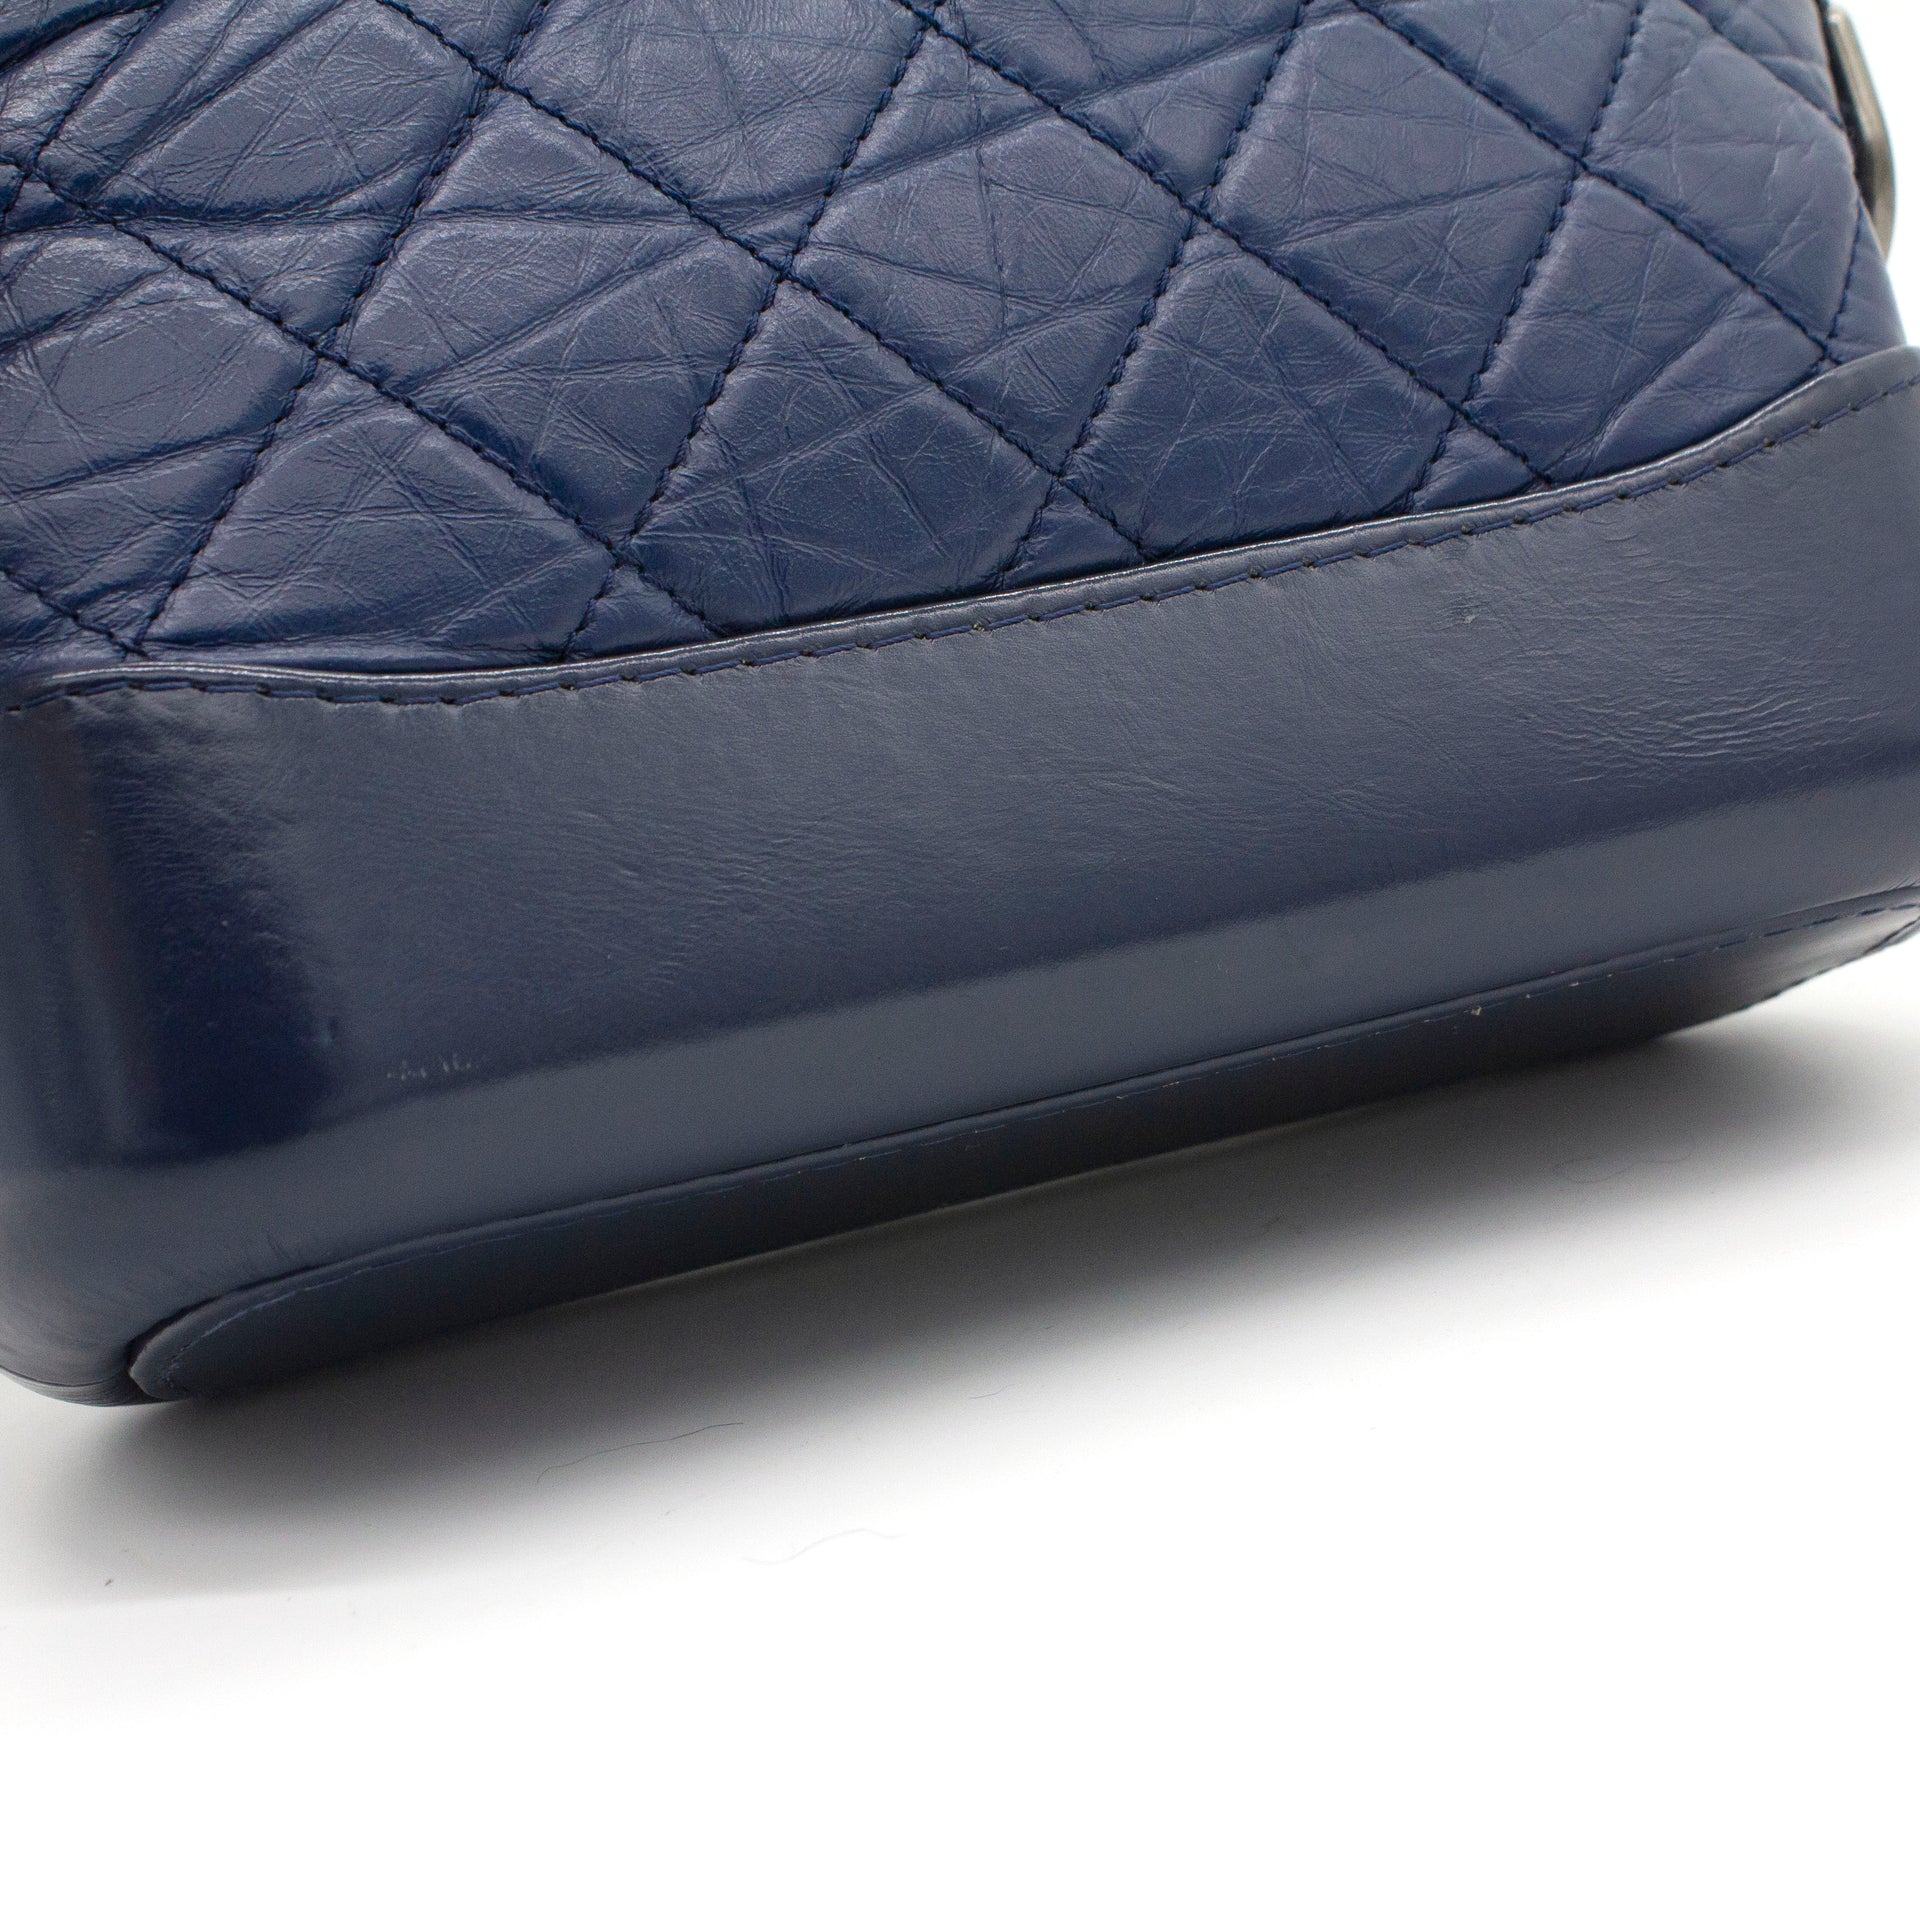 Calfskin Quilted Small Gabrielle Hobo Blue